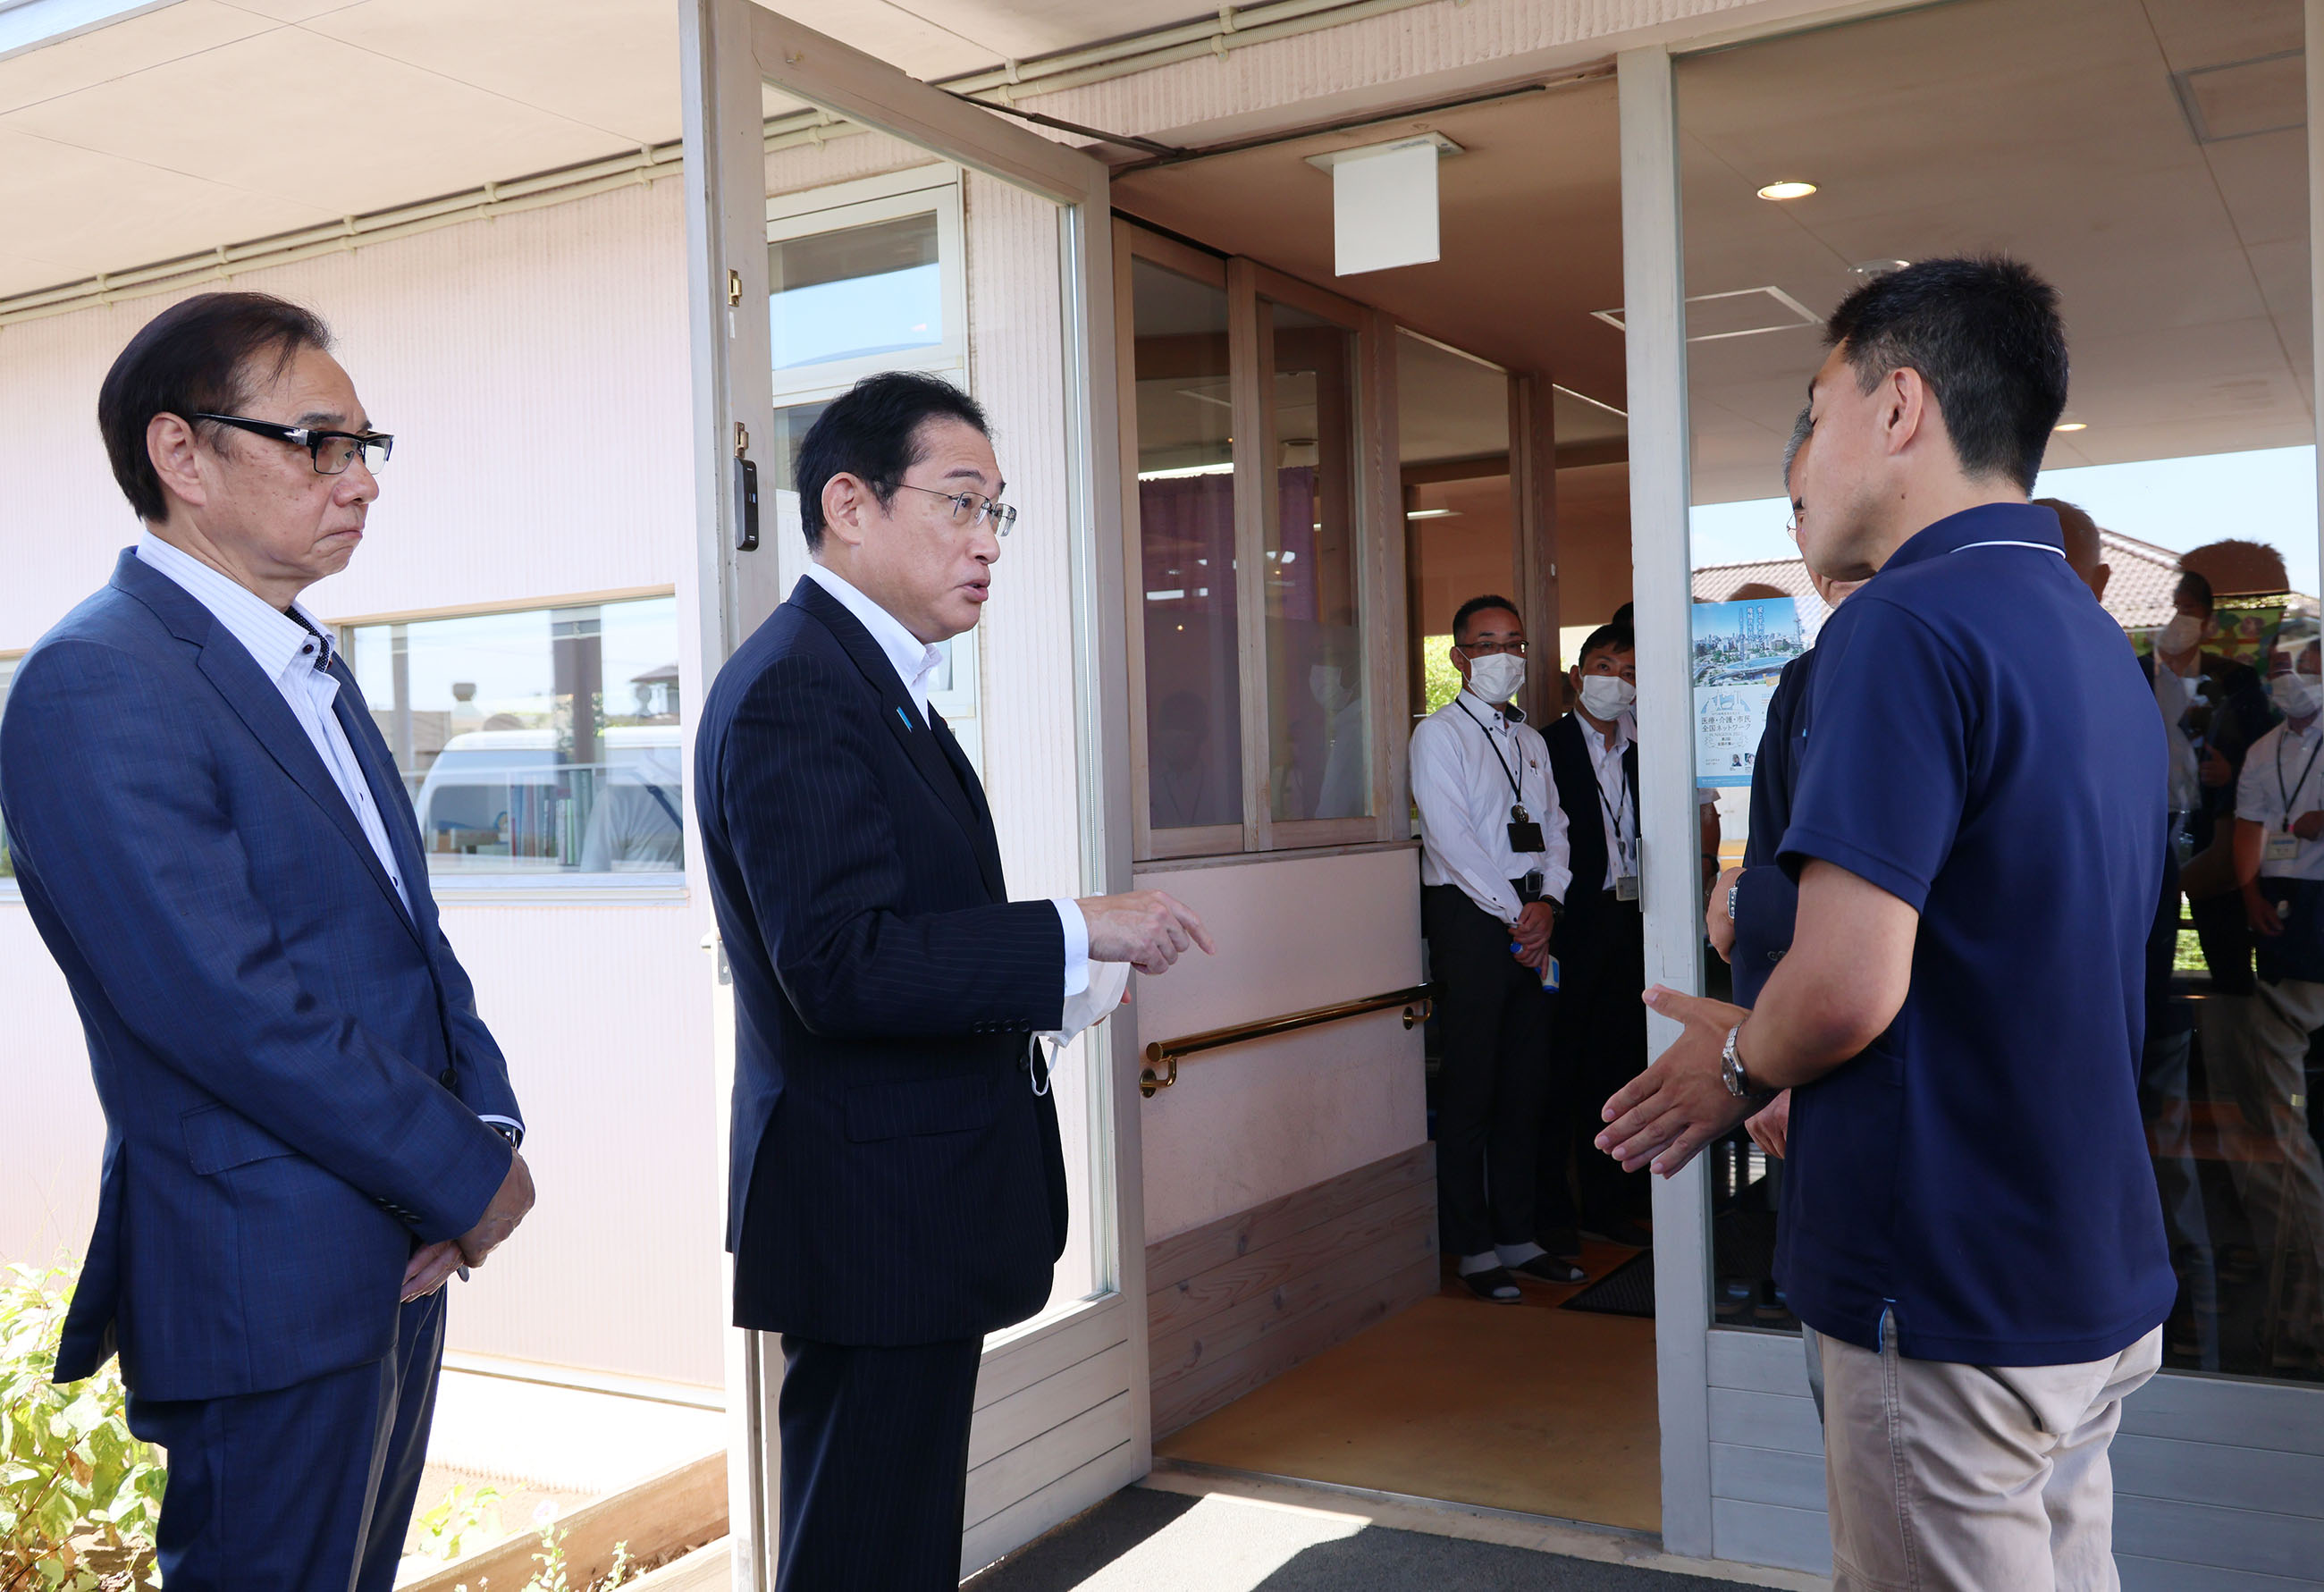 Prime Minister Kishida receiving a briefing at the Day Service Center Oido